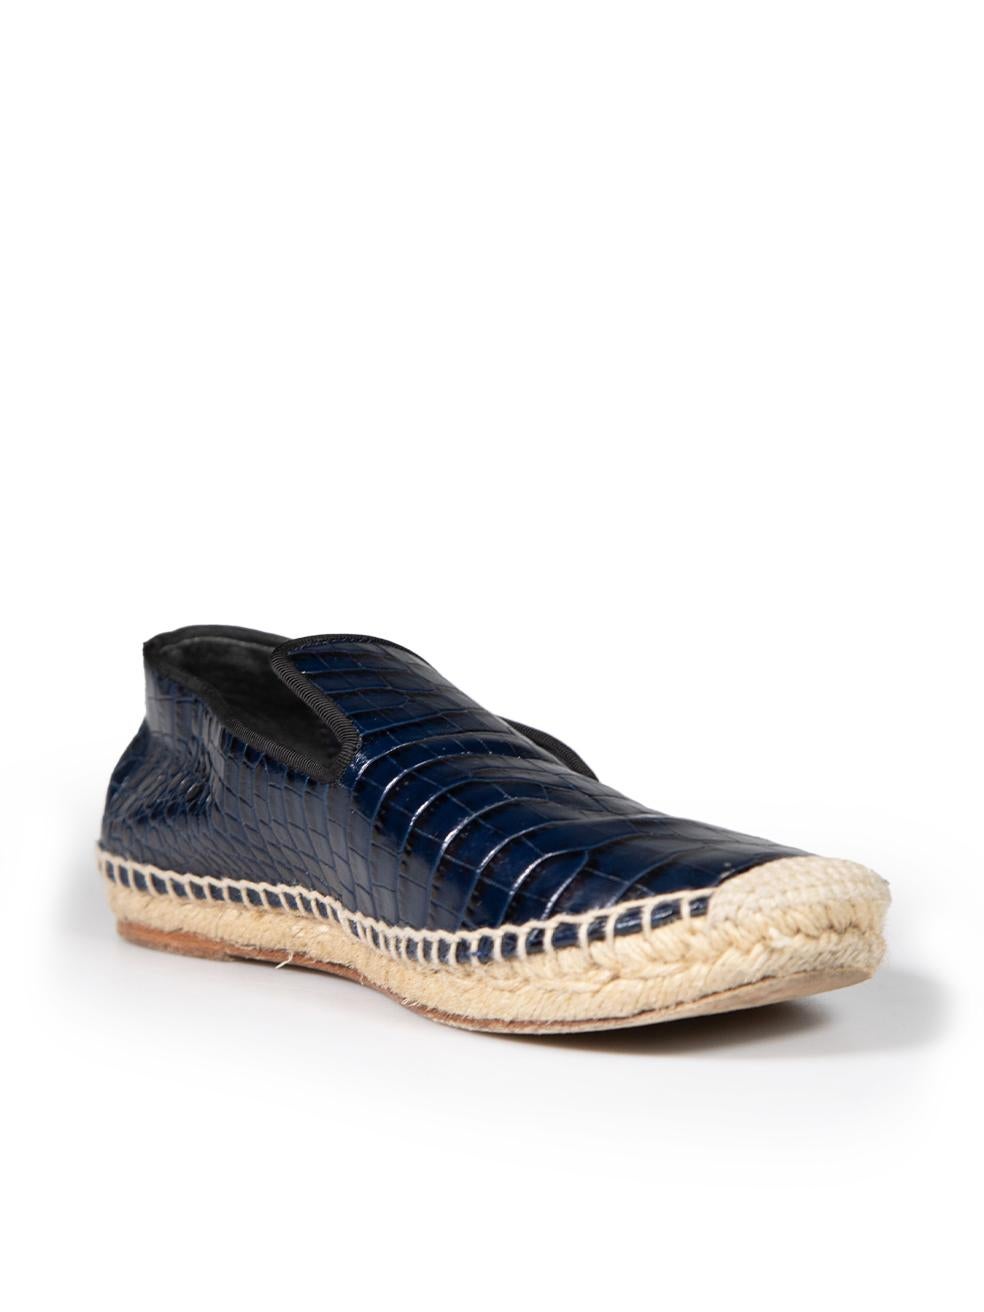 CONDITION is Very good. Minimal wear to shoes is evident. Minimal wear to the left shoe toe where some loose rope threads can be seen on this used Céline designer resale item.
 
 
 
 Details
 
 
 Navy
 
 Leather
 
 Espadrilles
 
 Croc embossed